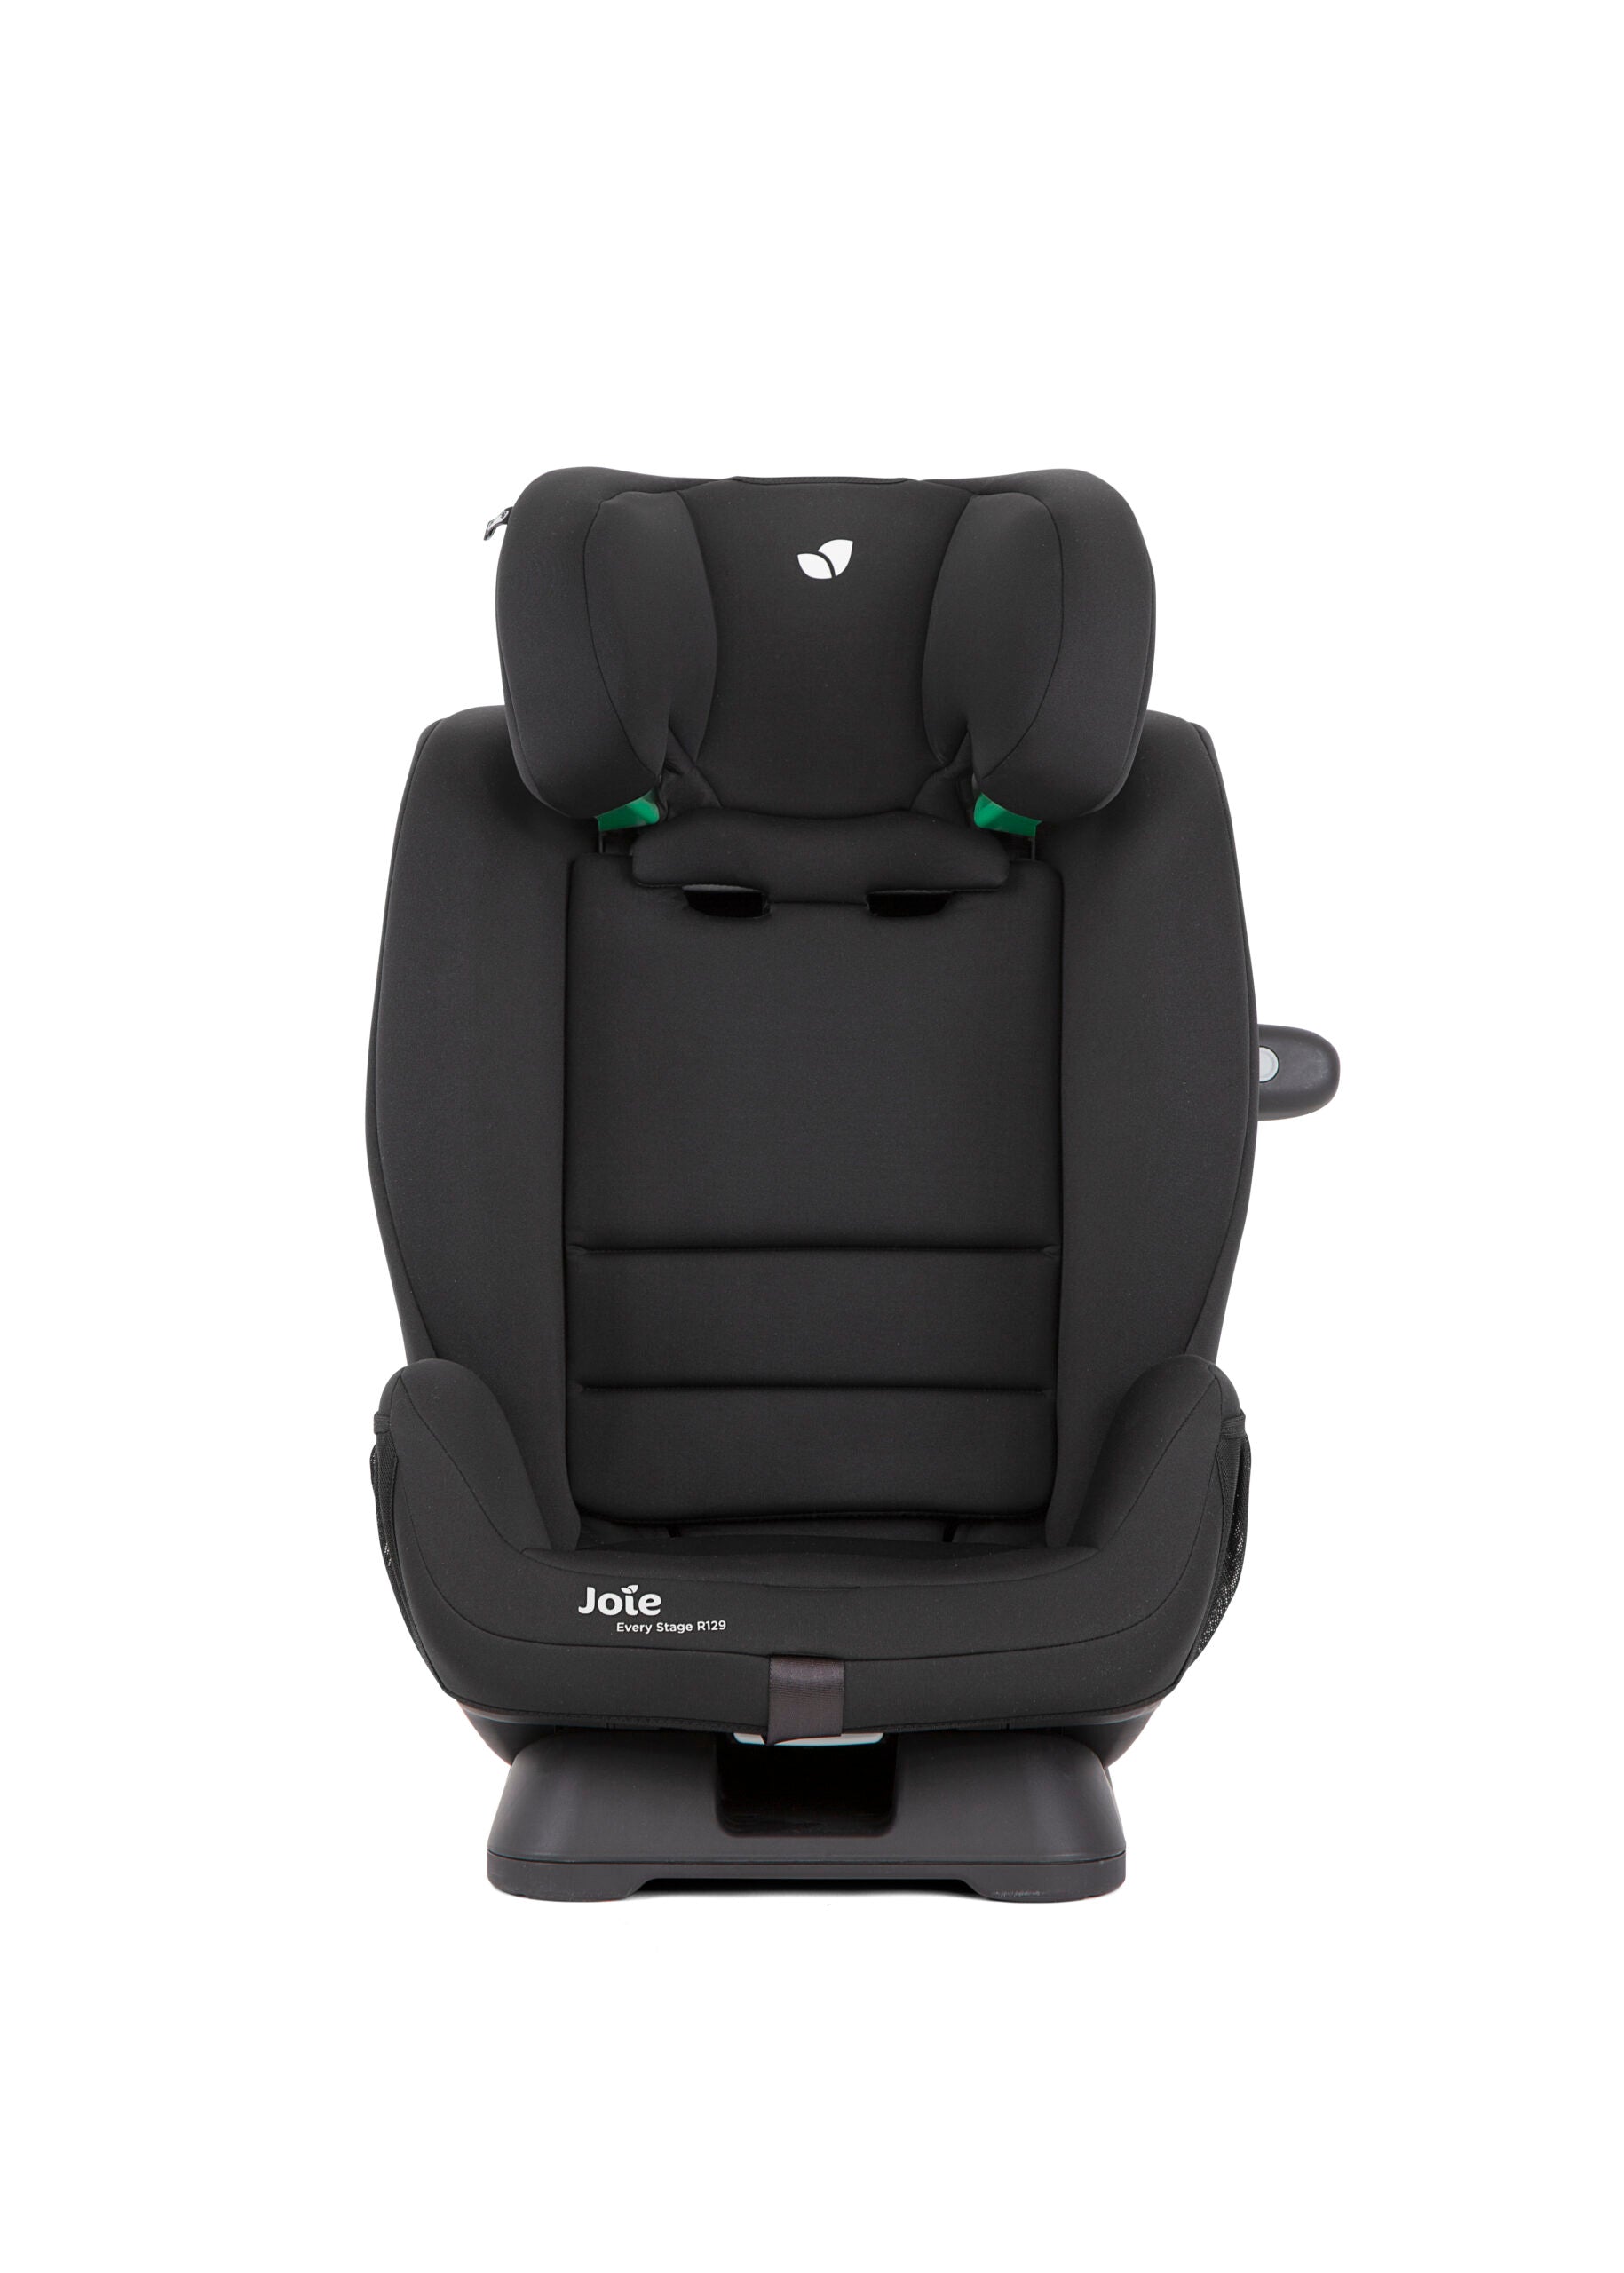 Joie combination car seats Every Stage R129 - Shale C2117AASHA000